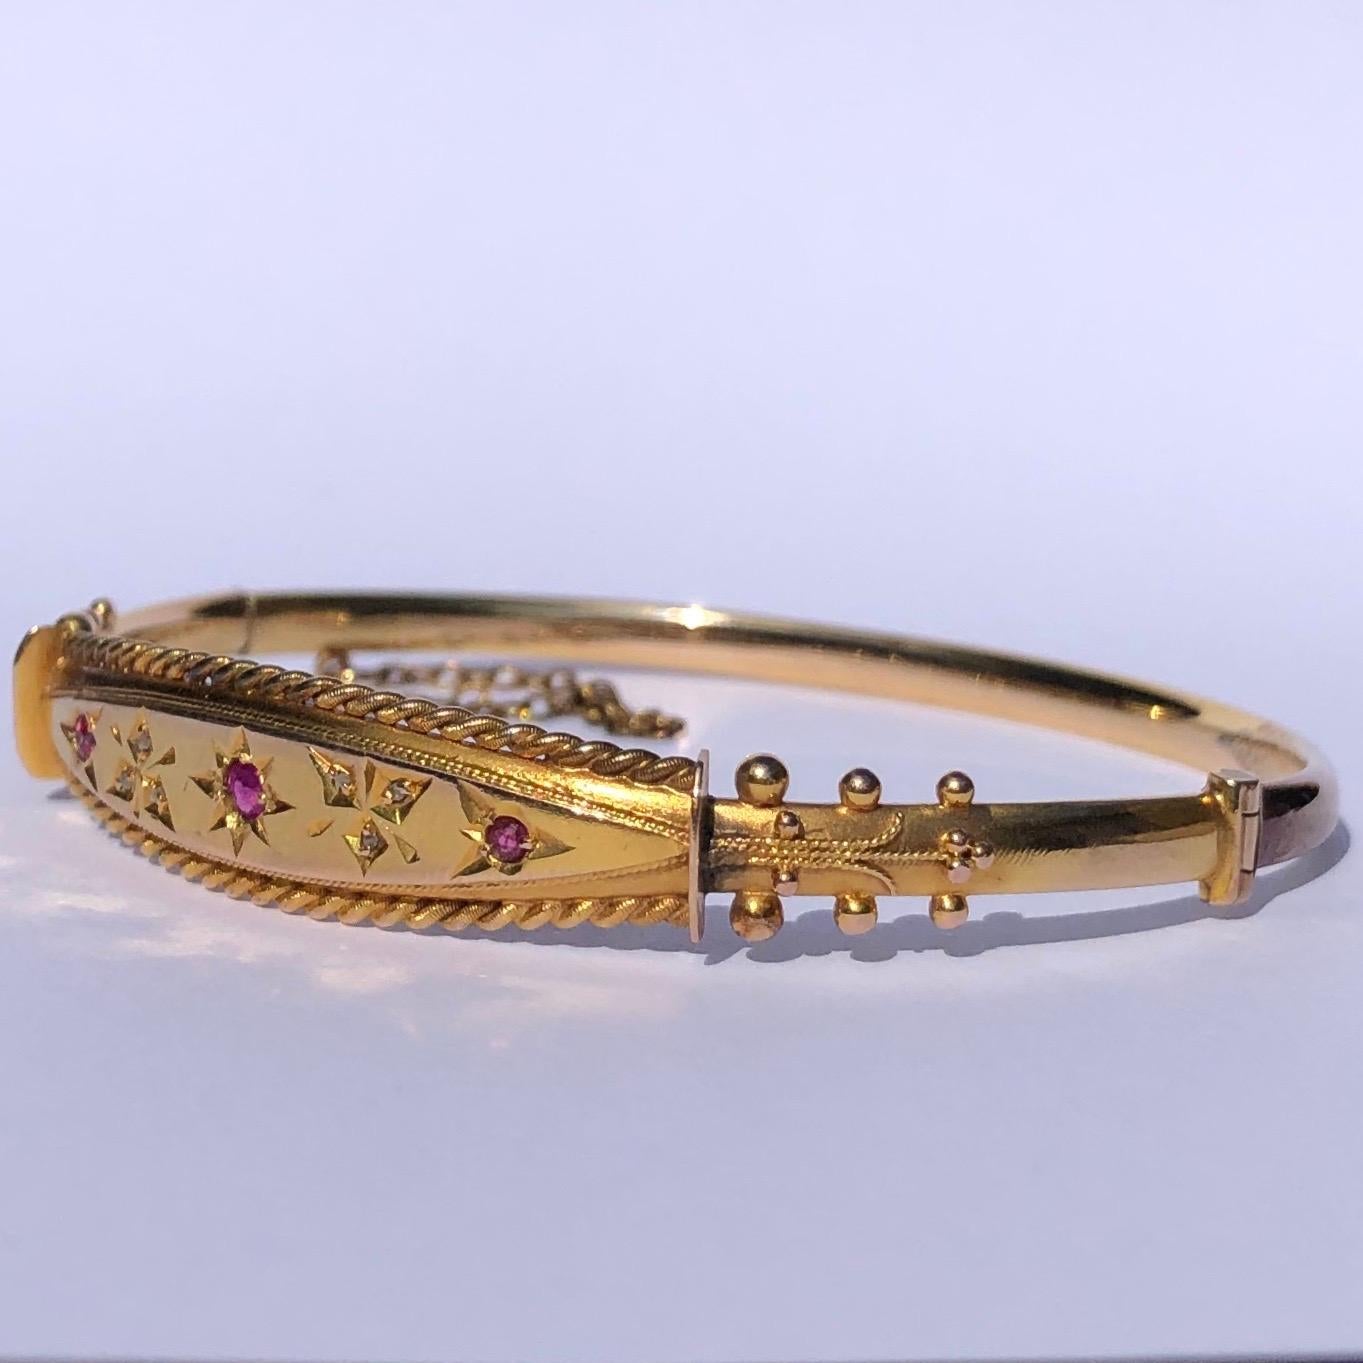 The 9 carat gold is bright the bangle has so much detail. The detailed panel holds rose cut diamonds set in pointed trefoils and rubies set in star settings. Either side of the decorative panel is rope twisted gold and the shoulders have orb